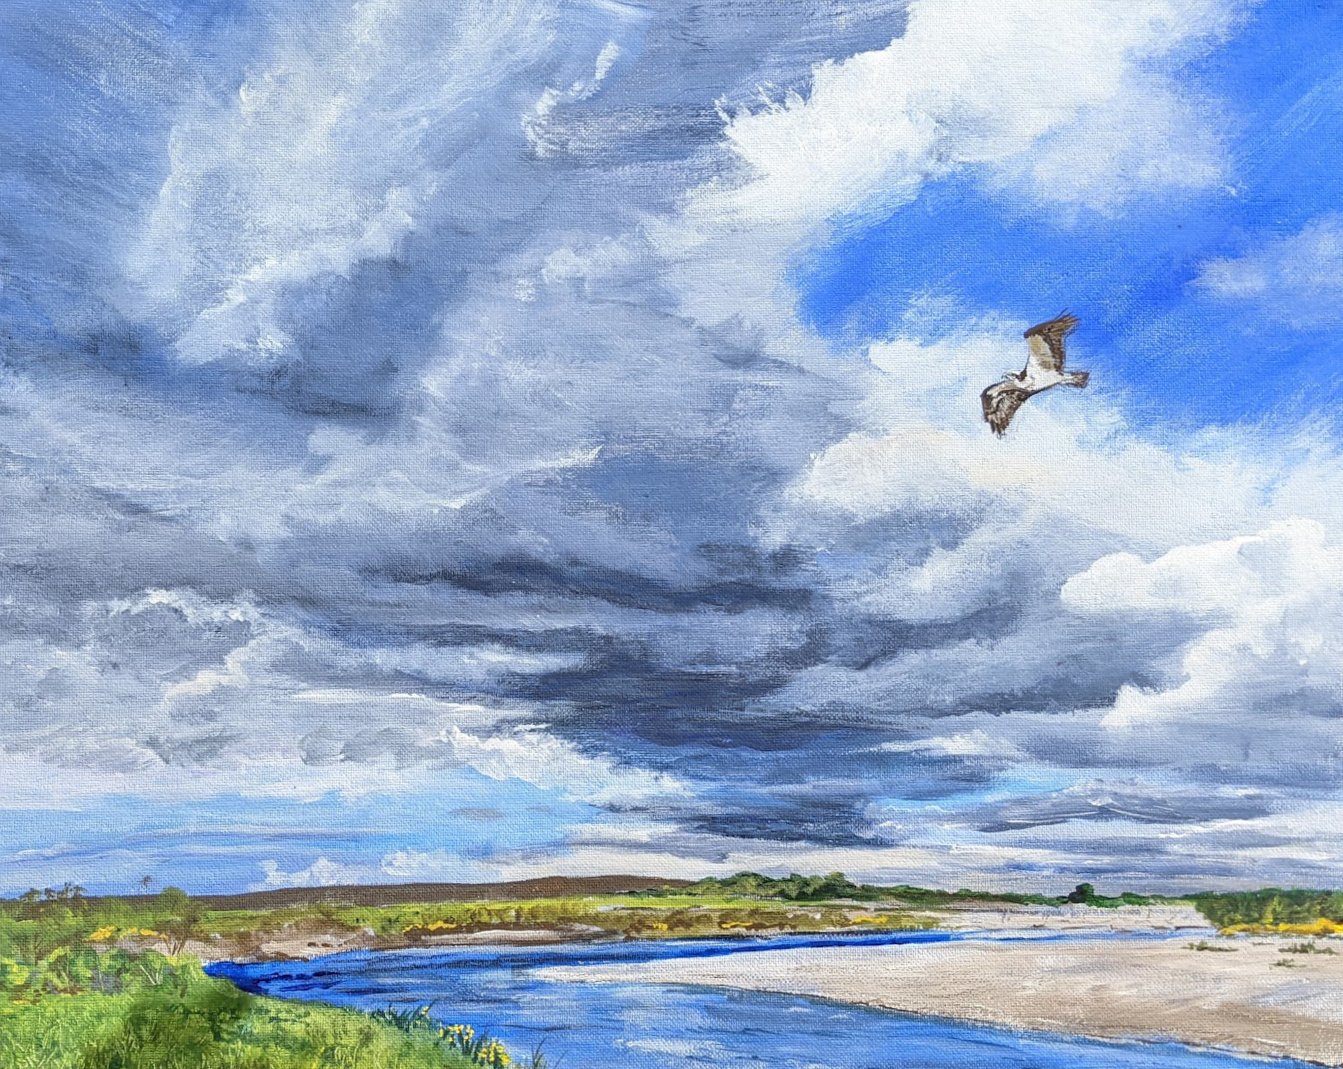 River Spey near Spey Bay, Moray. Framed fine art giclee print, ready to hang. FREE P&P in UK